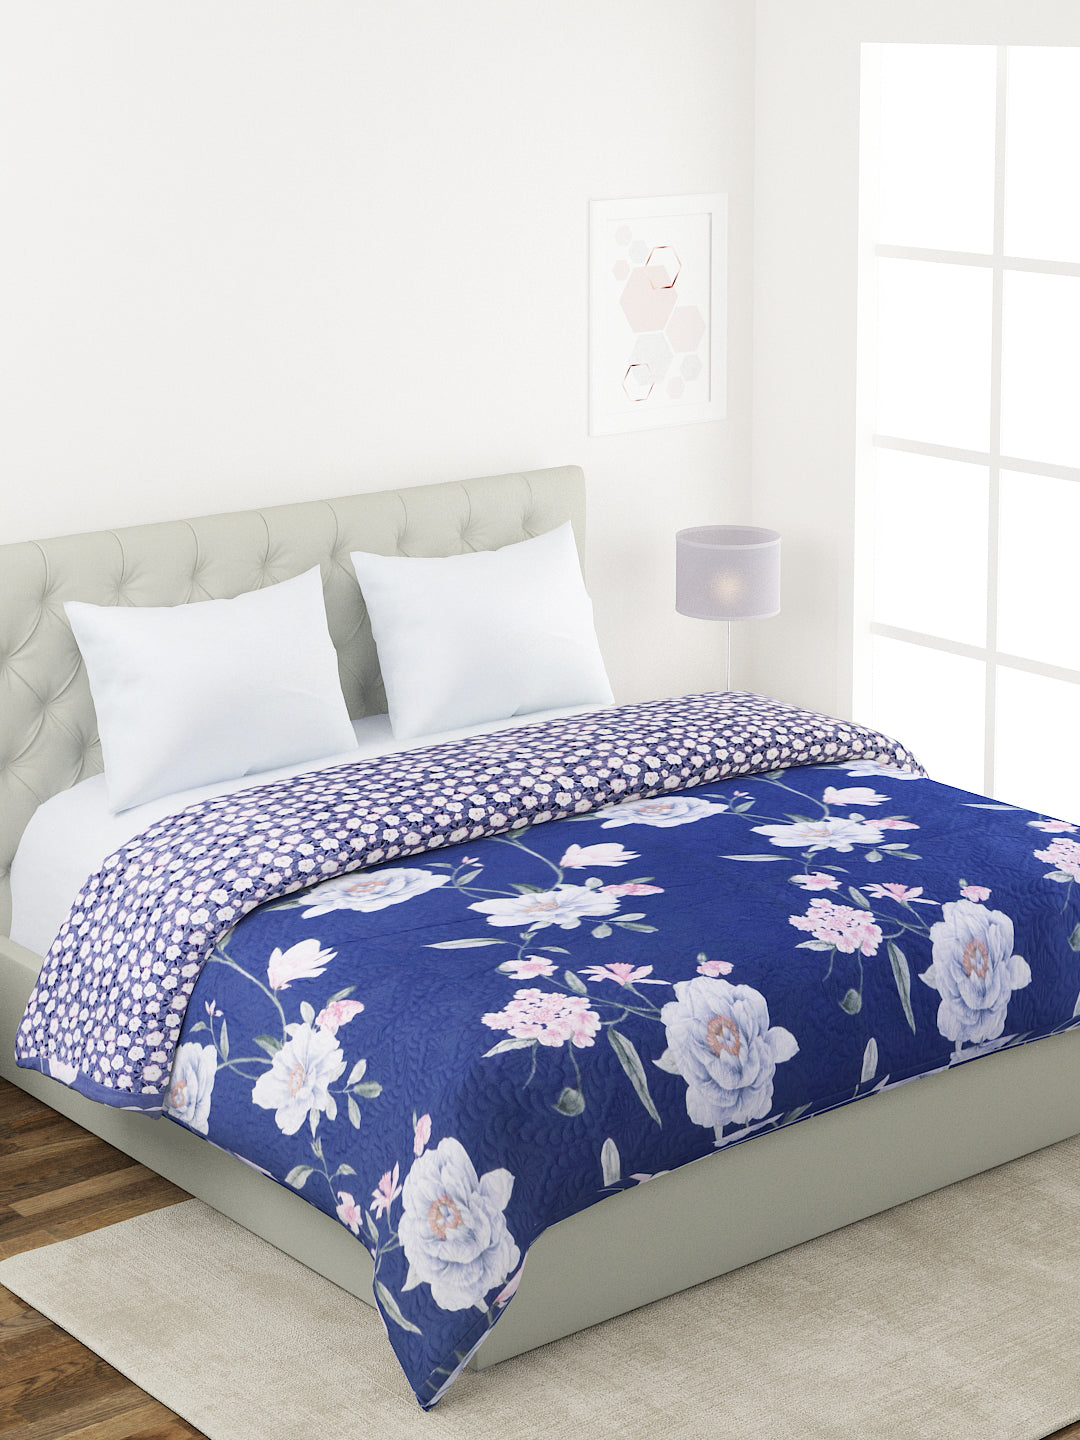 Floral Print Double Bed Light Weight Comforter-Navy Blue